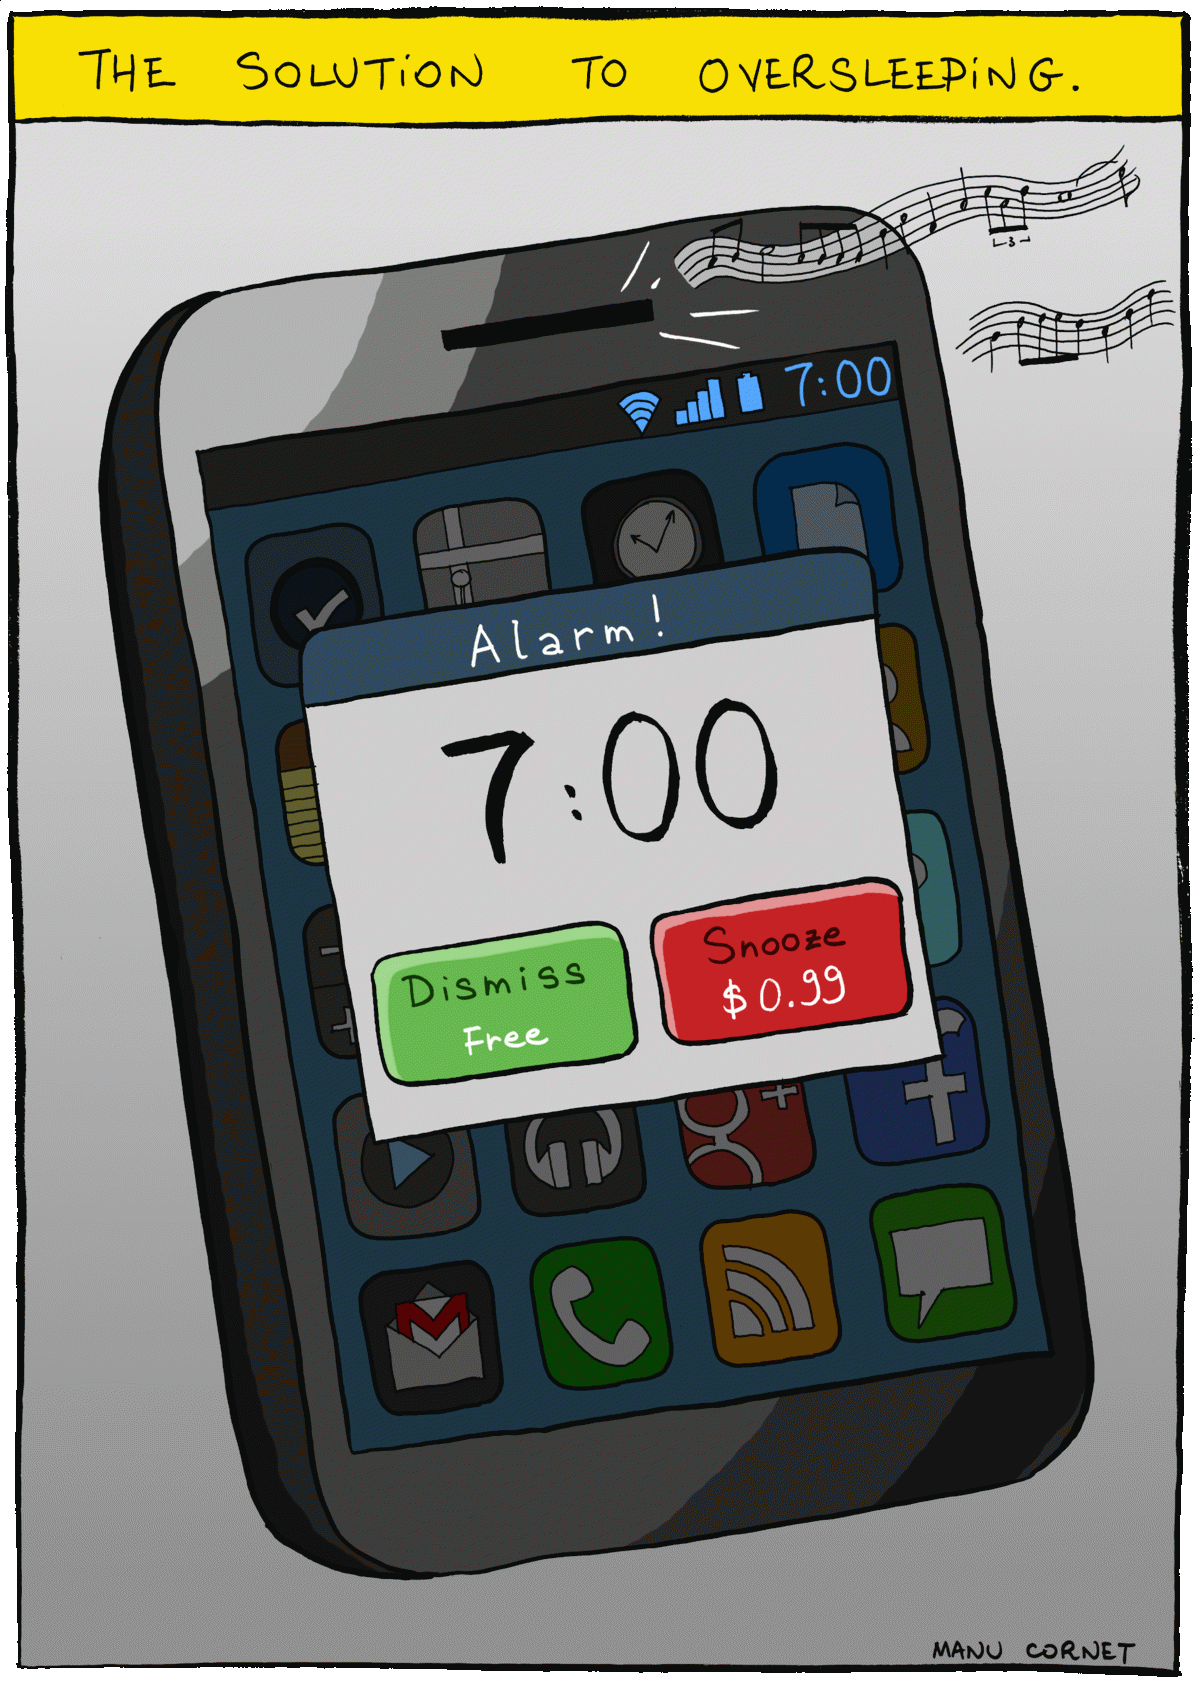 2012.04.13_the_solution_to_oversleeping_large